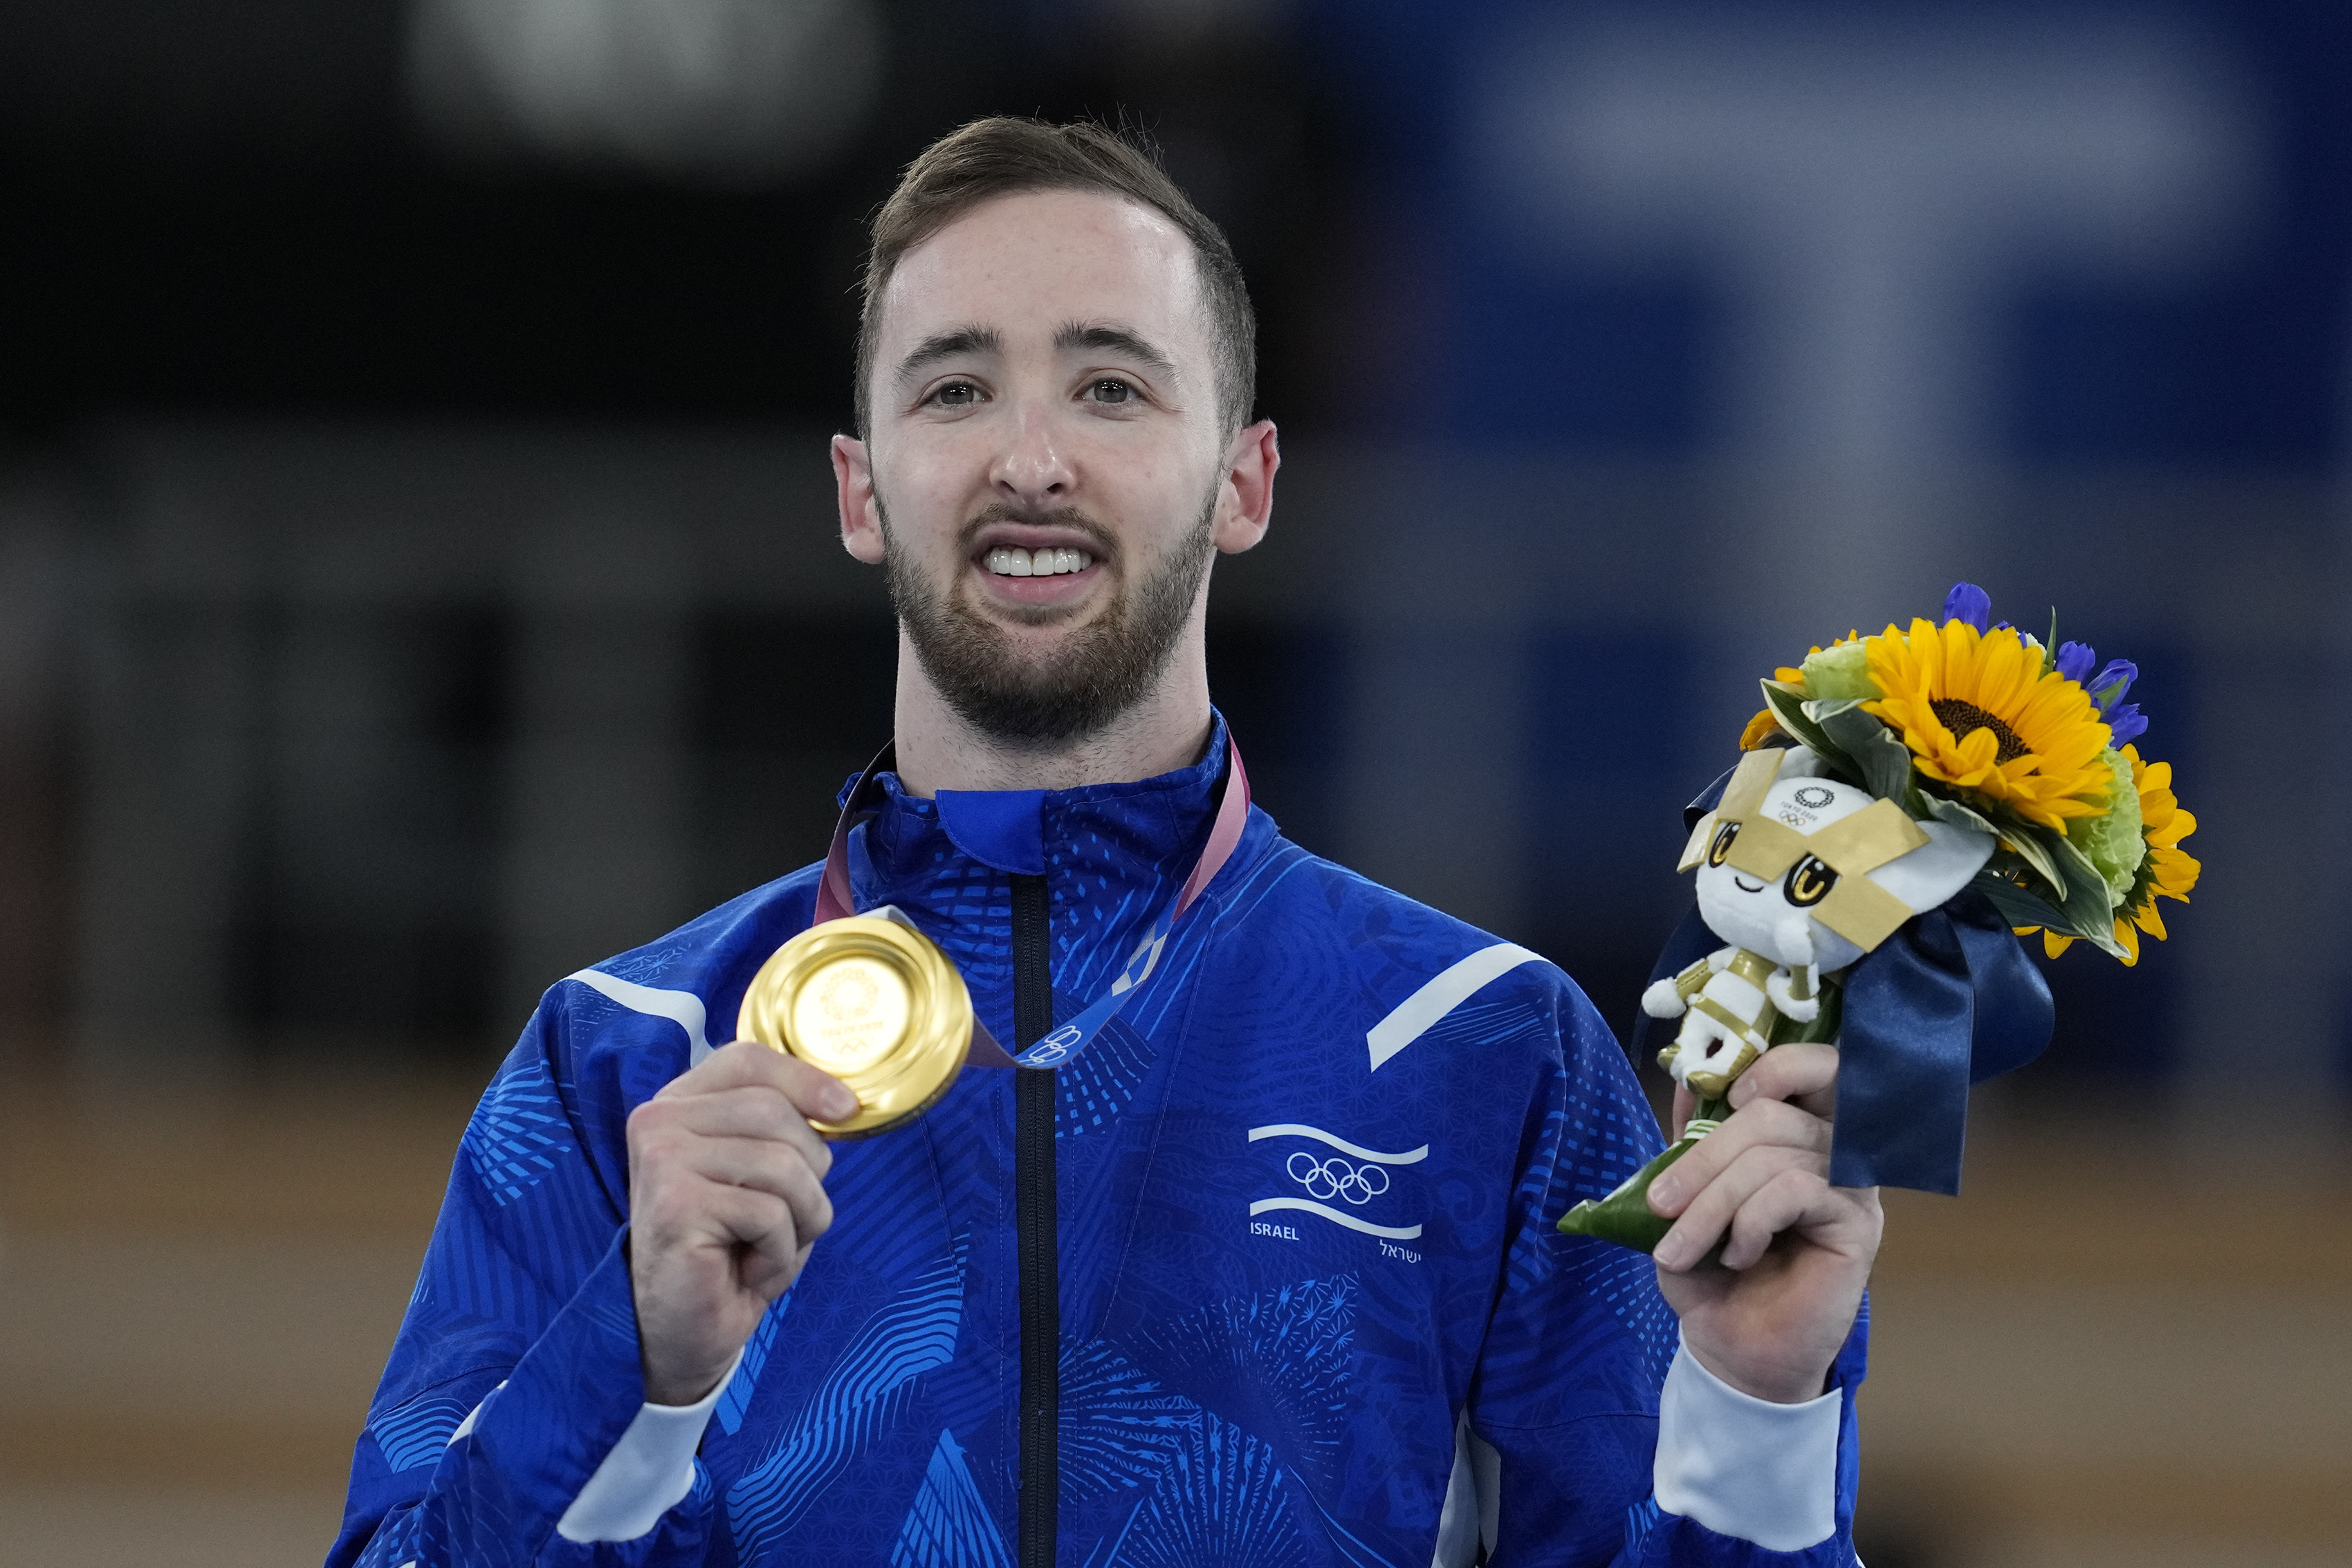 Olympic Men S Gymnastics 21 Floor Medal Winners Scores And Results Bleacher Report Latest News Videos And Highlights